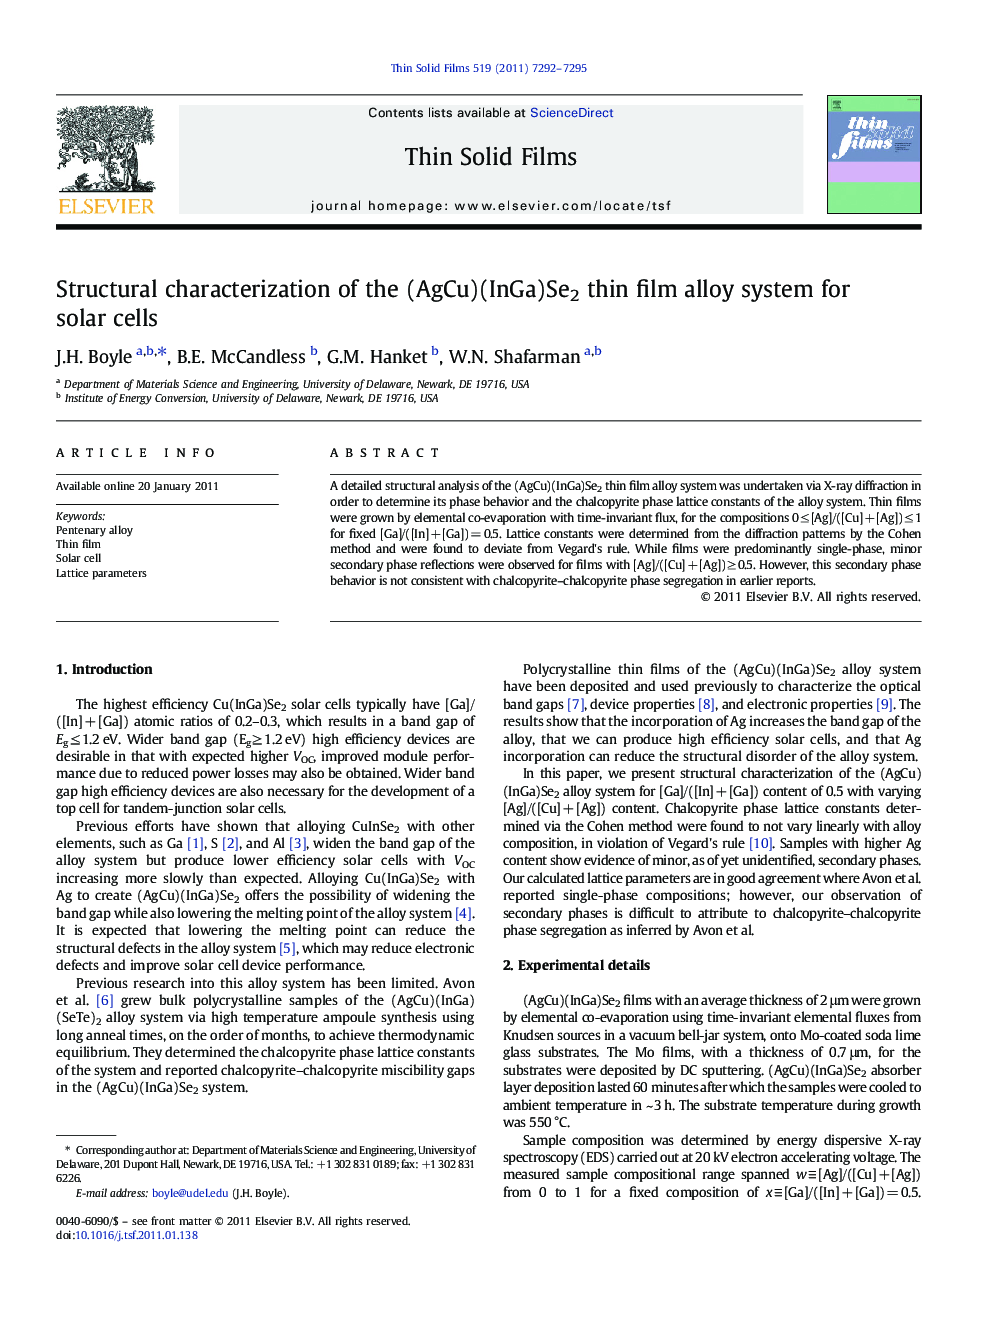 Structural characterization of the (AgCu)(InGa)Se2 thin film alloy system for solar cells